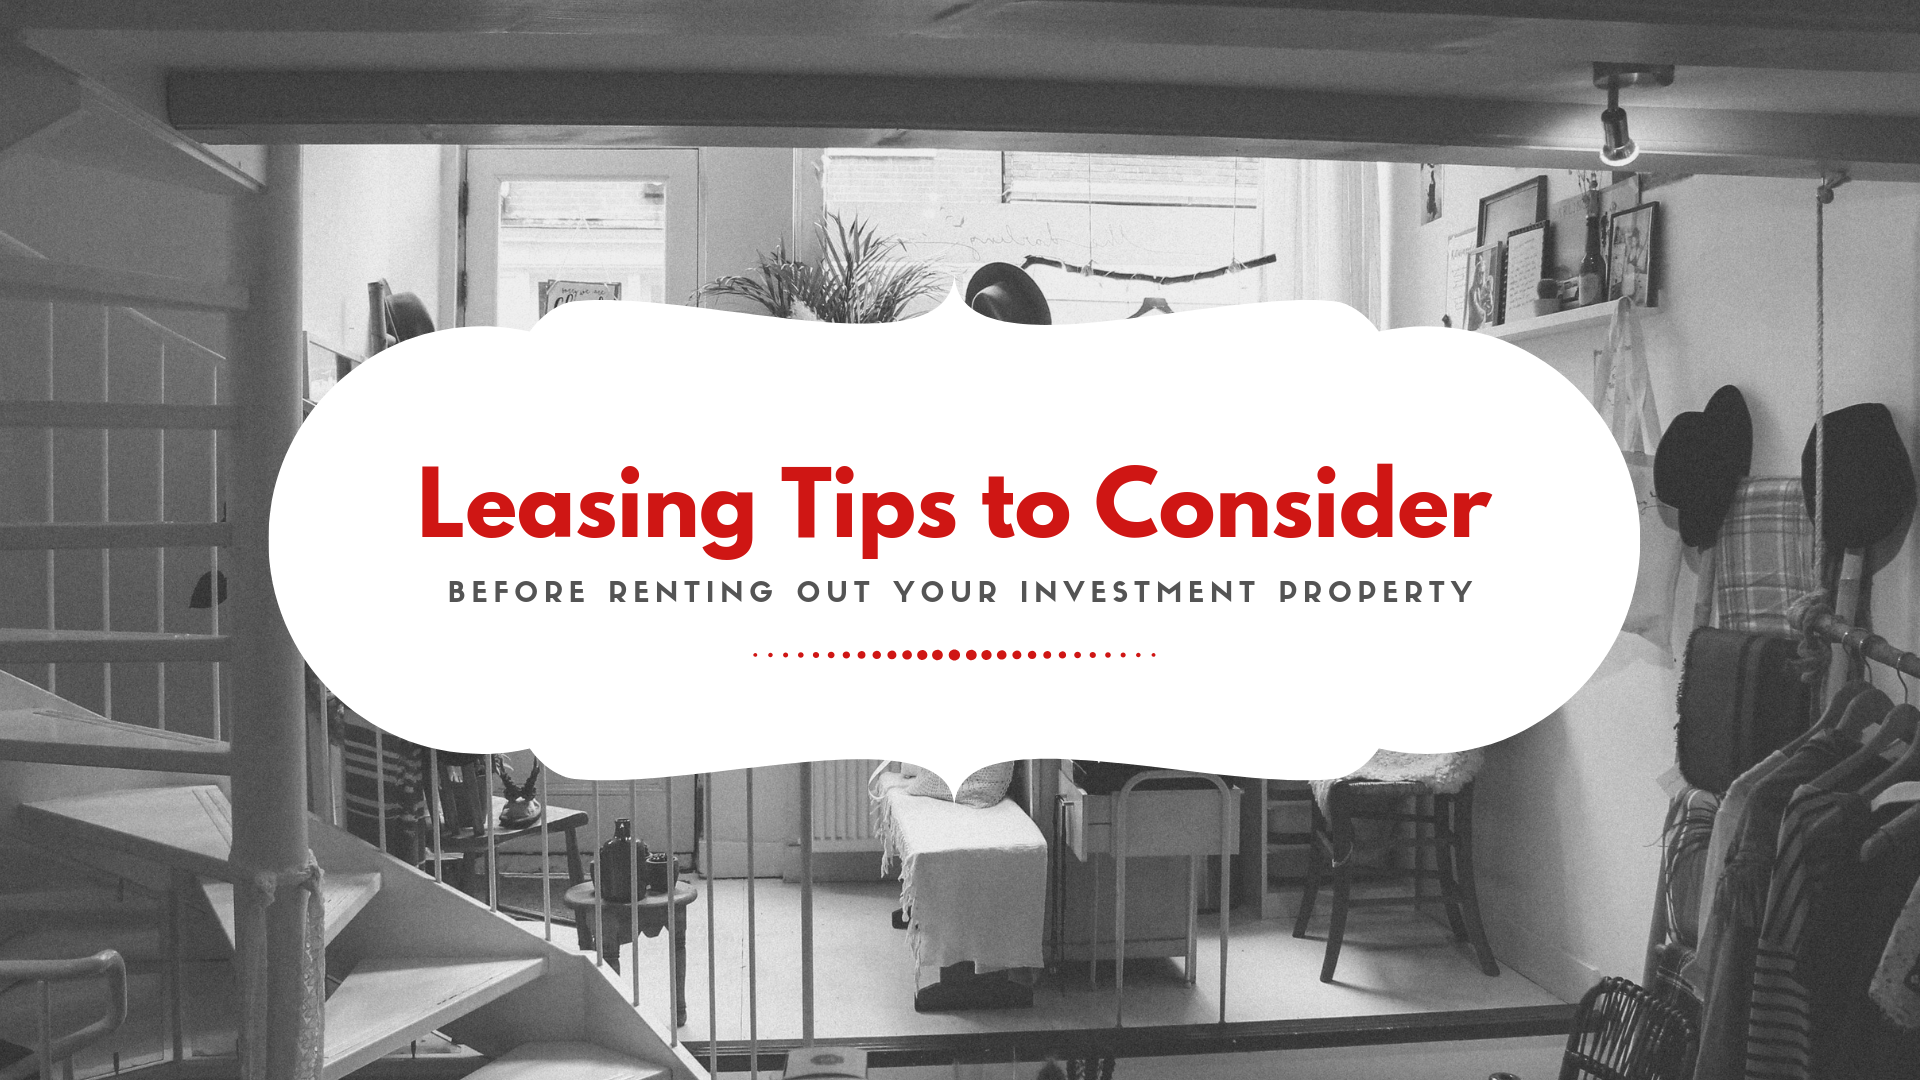 9 Leasing Tips to Consider Before Renting out Your Investment Property in Colorado Springs